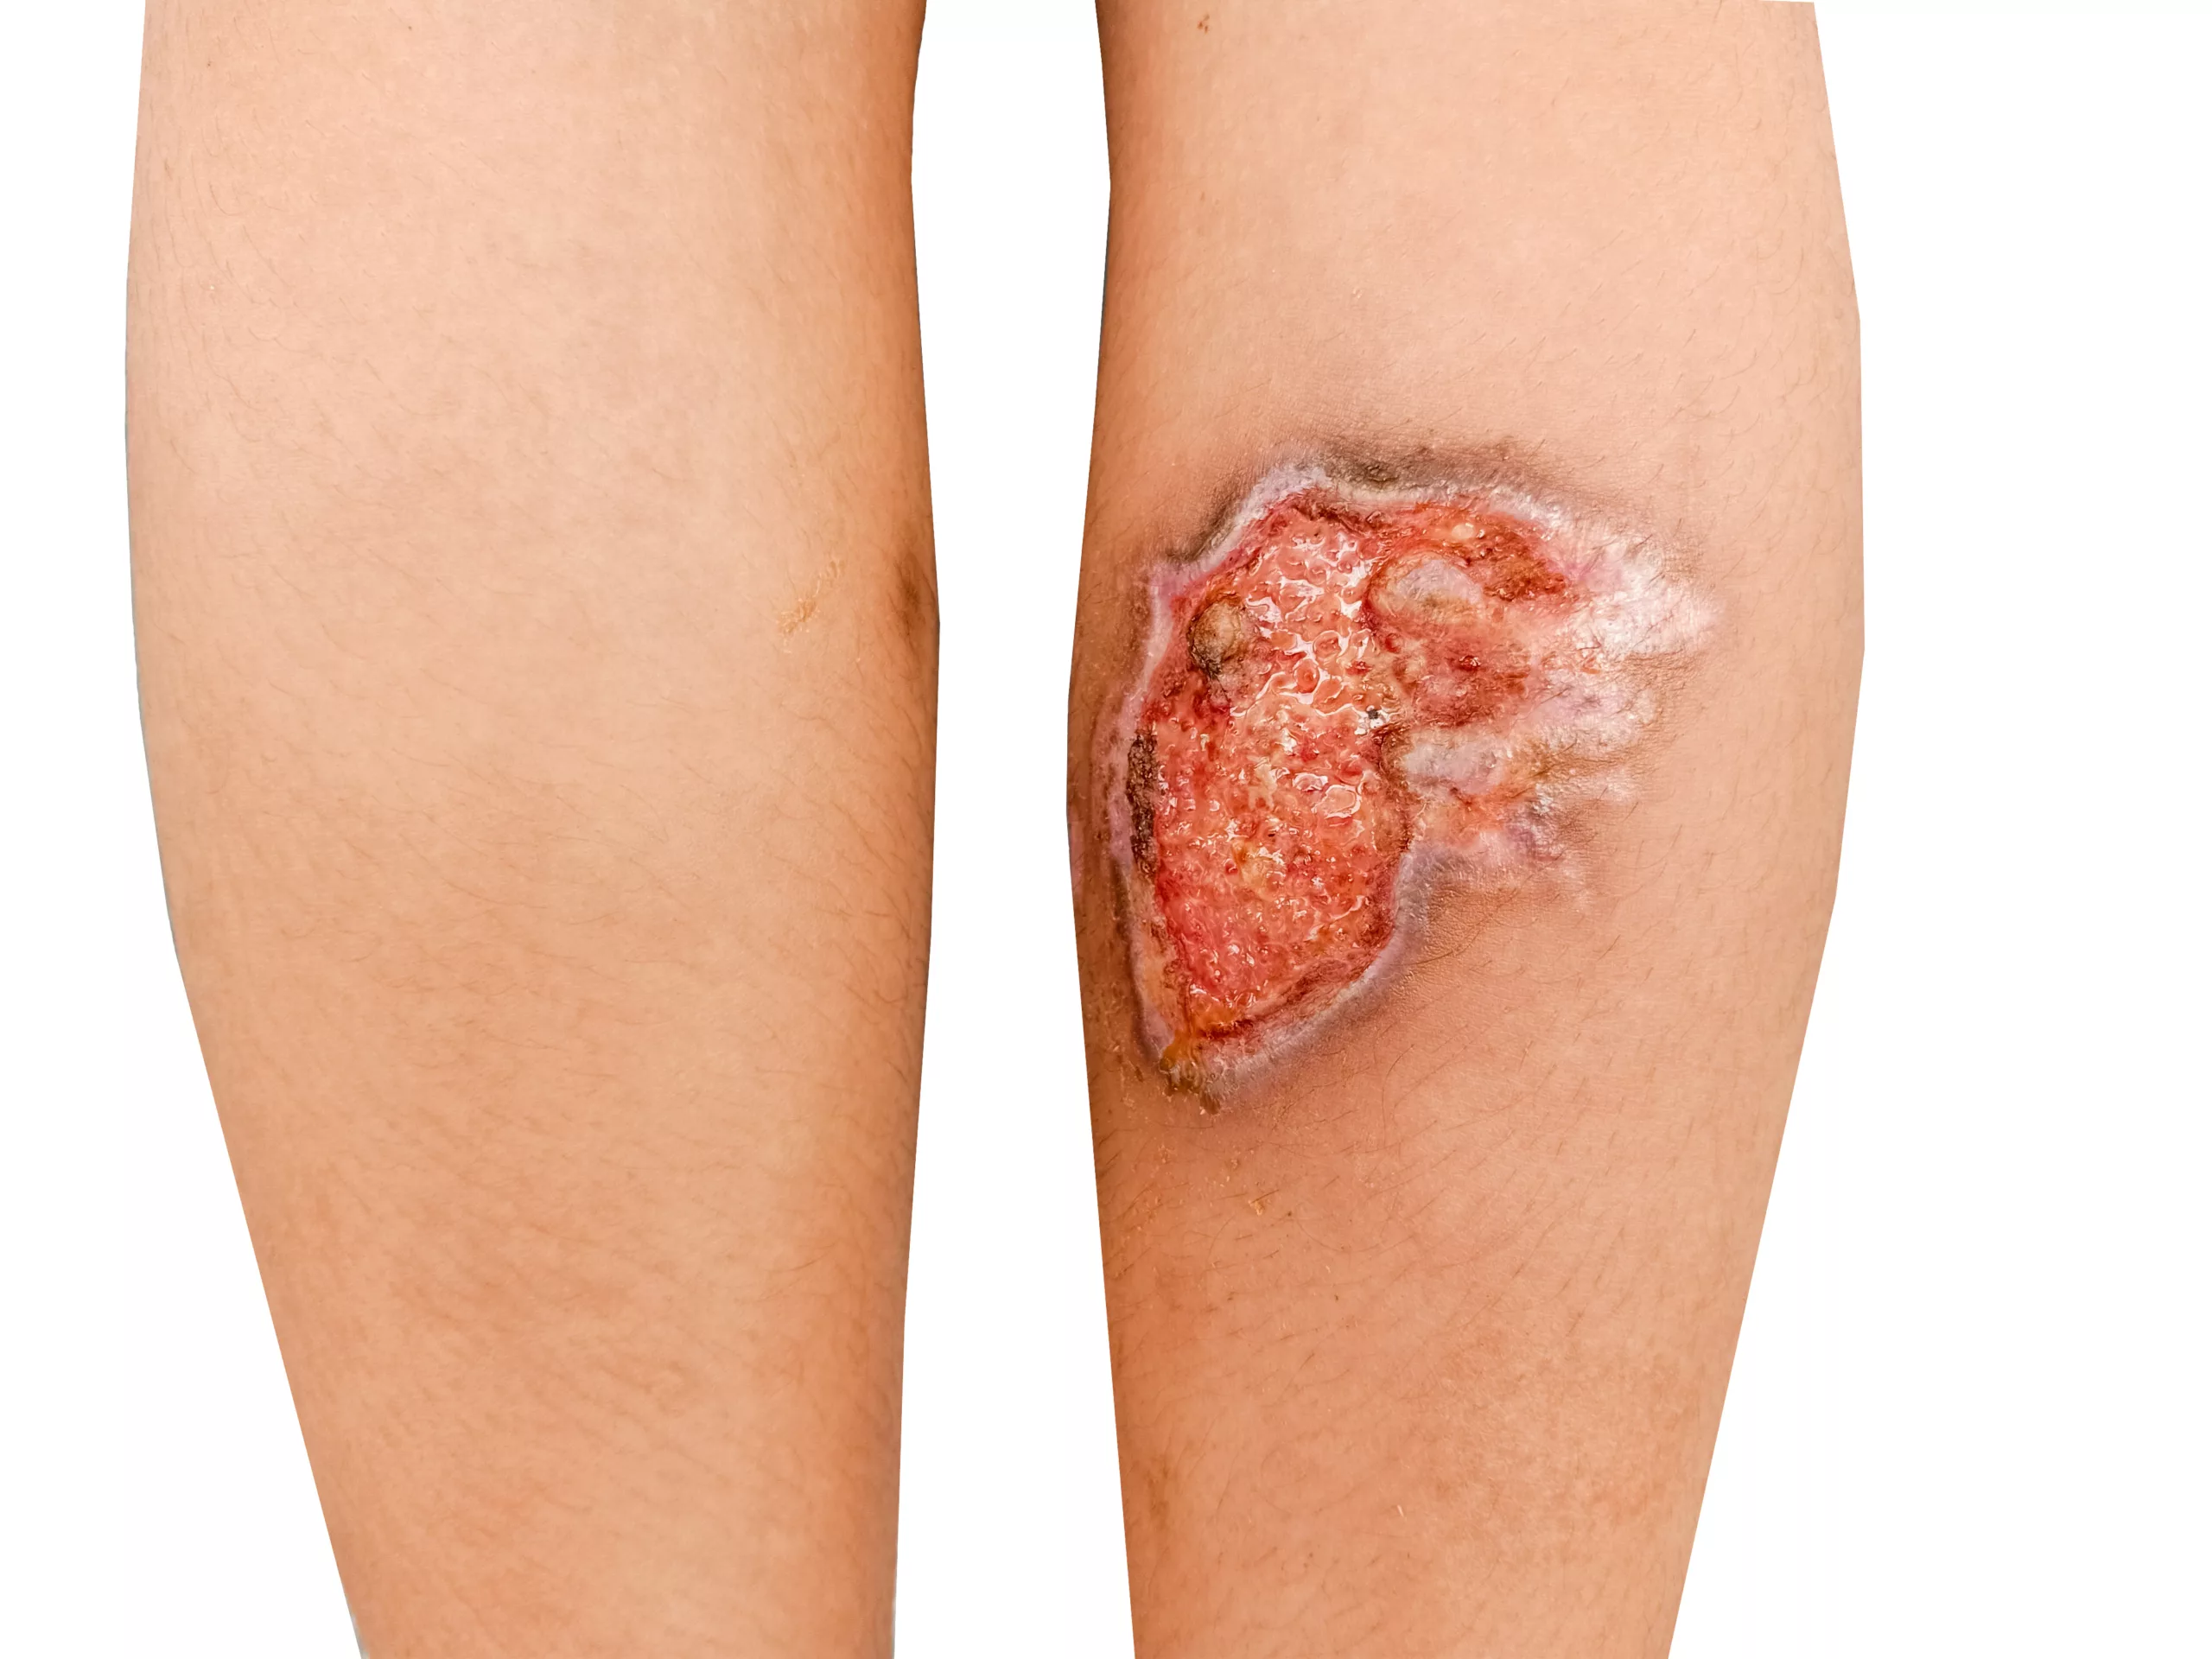 The image shows a leg ulcer as a complication in Stasis Dermatitis